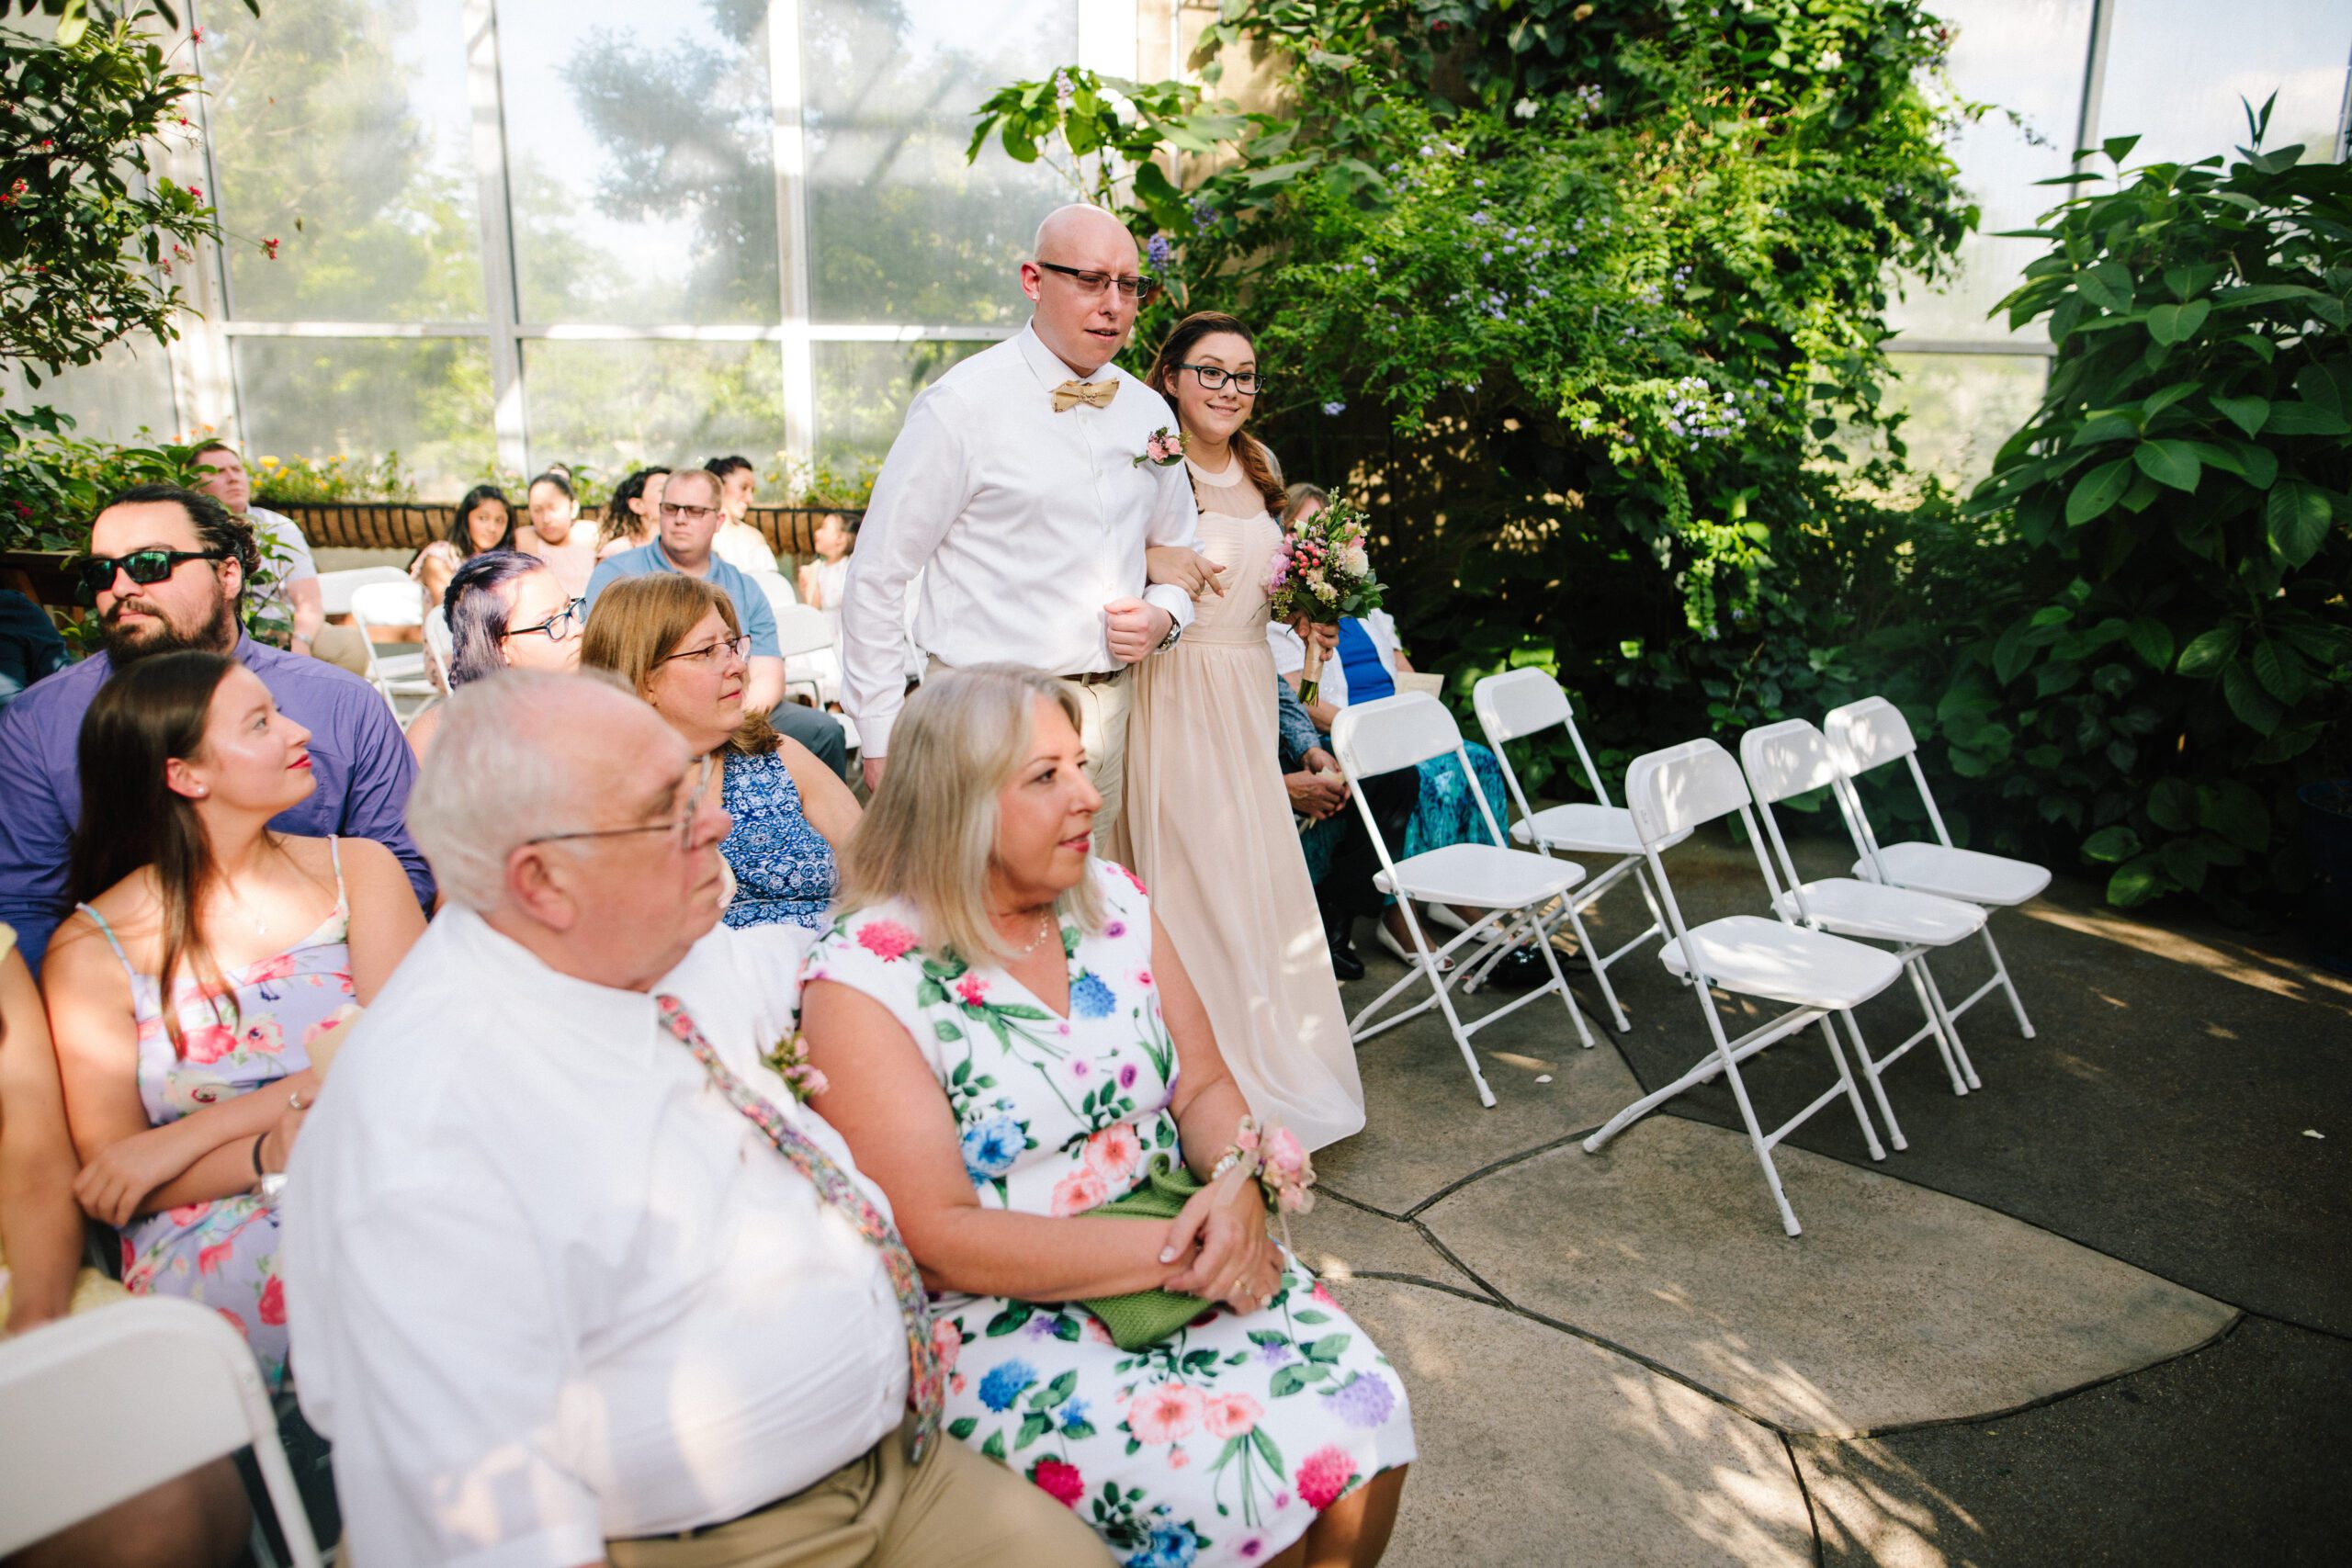 The bridal party walks down the aisle for the intimate Butterfly Pavilion wedding.